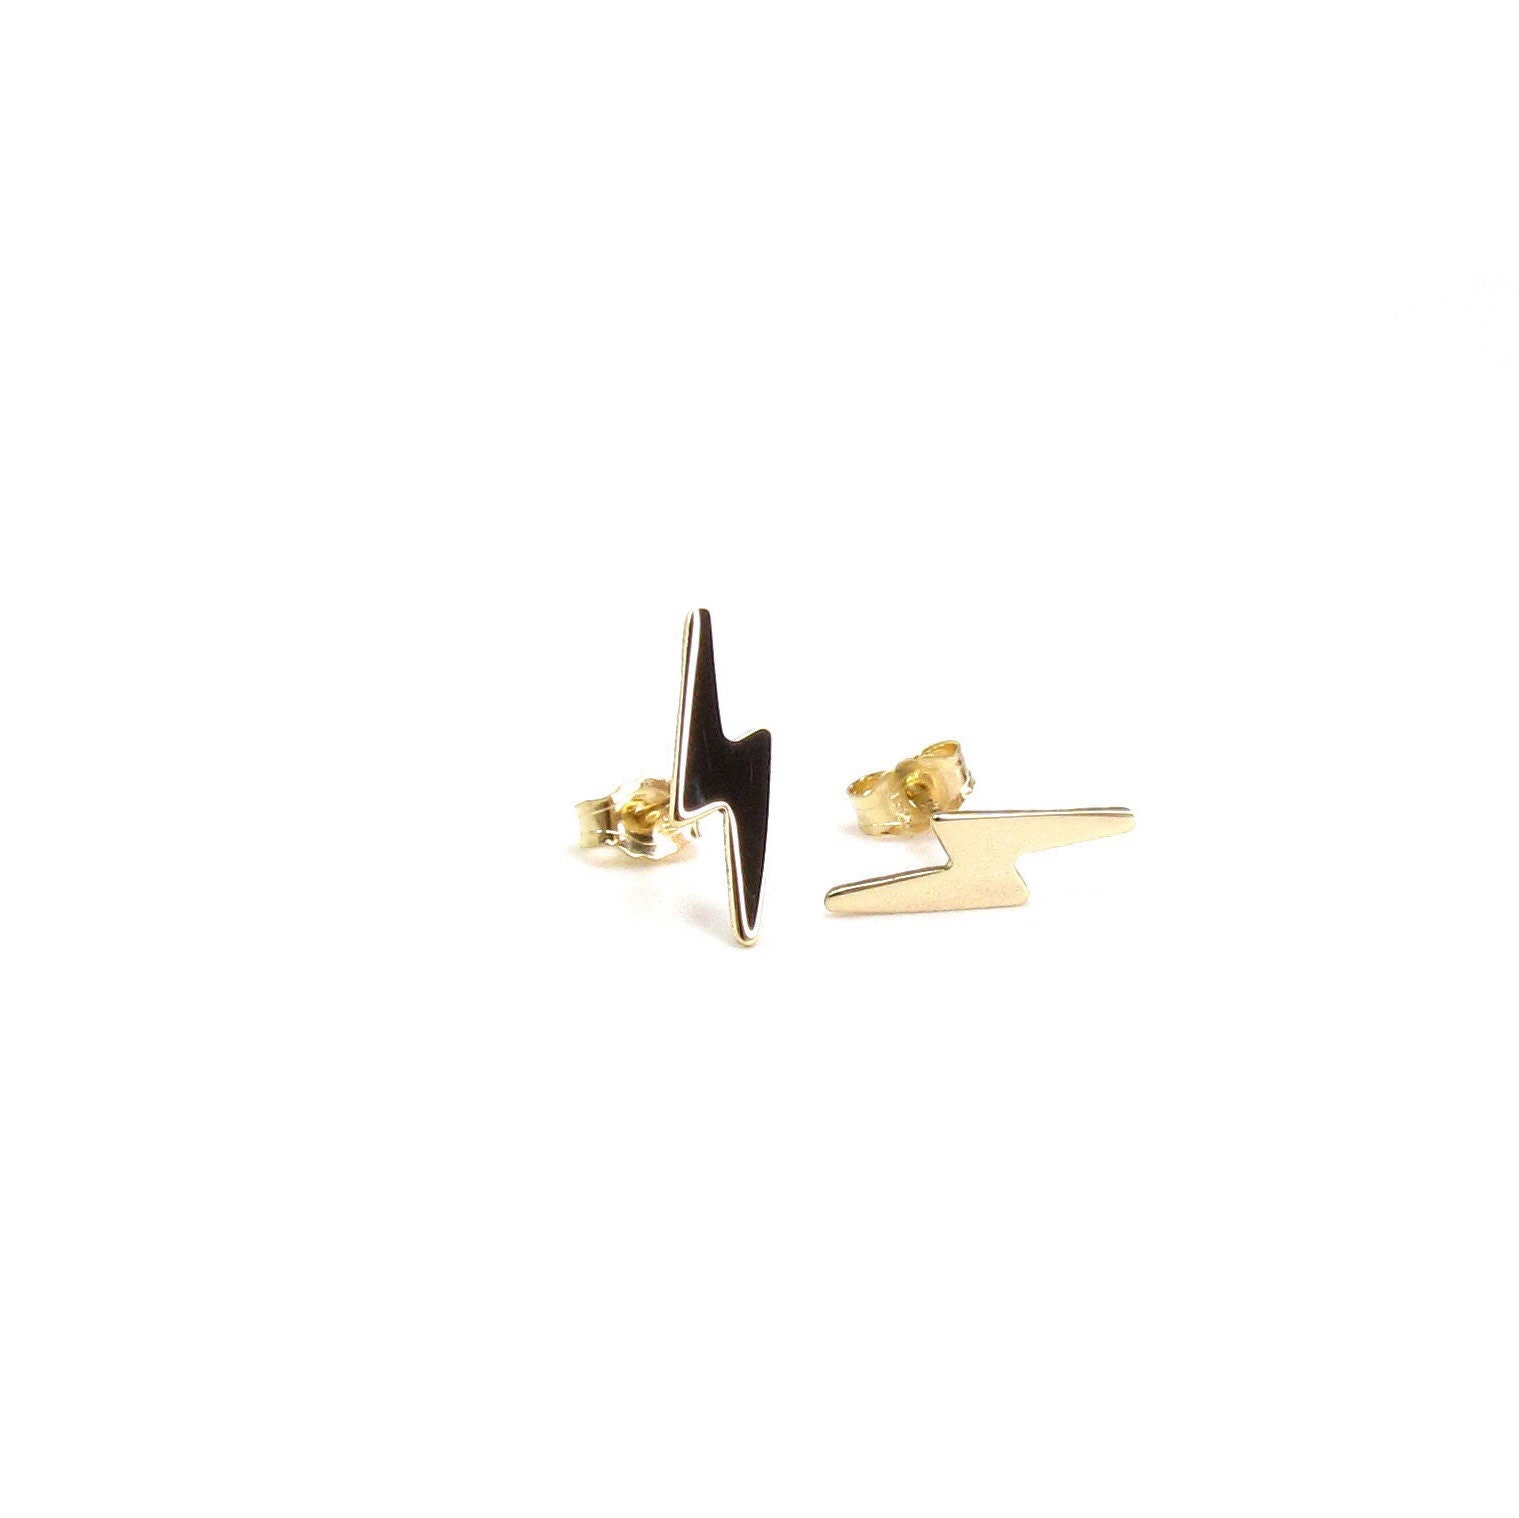 12K Solid Gold Tiny Lightning Bolt Studs • Lightning Stud Earrings •  Ligntning Bolt Post Earrings • Sold as a PAIR of Studs